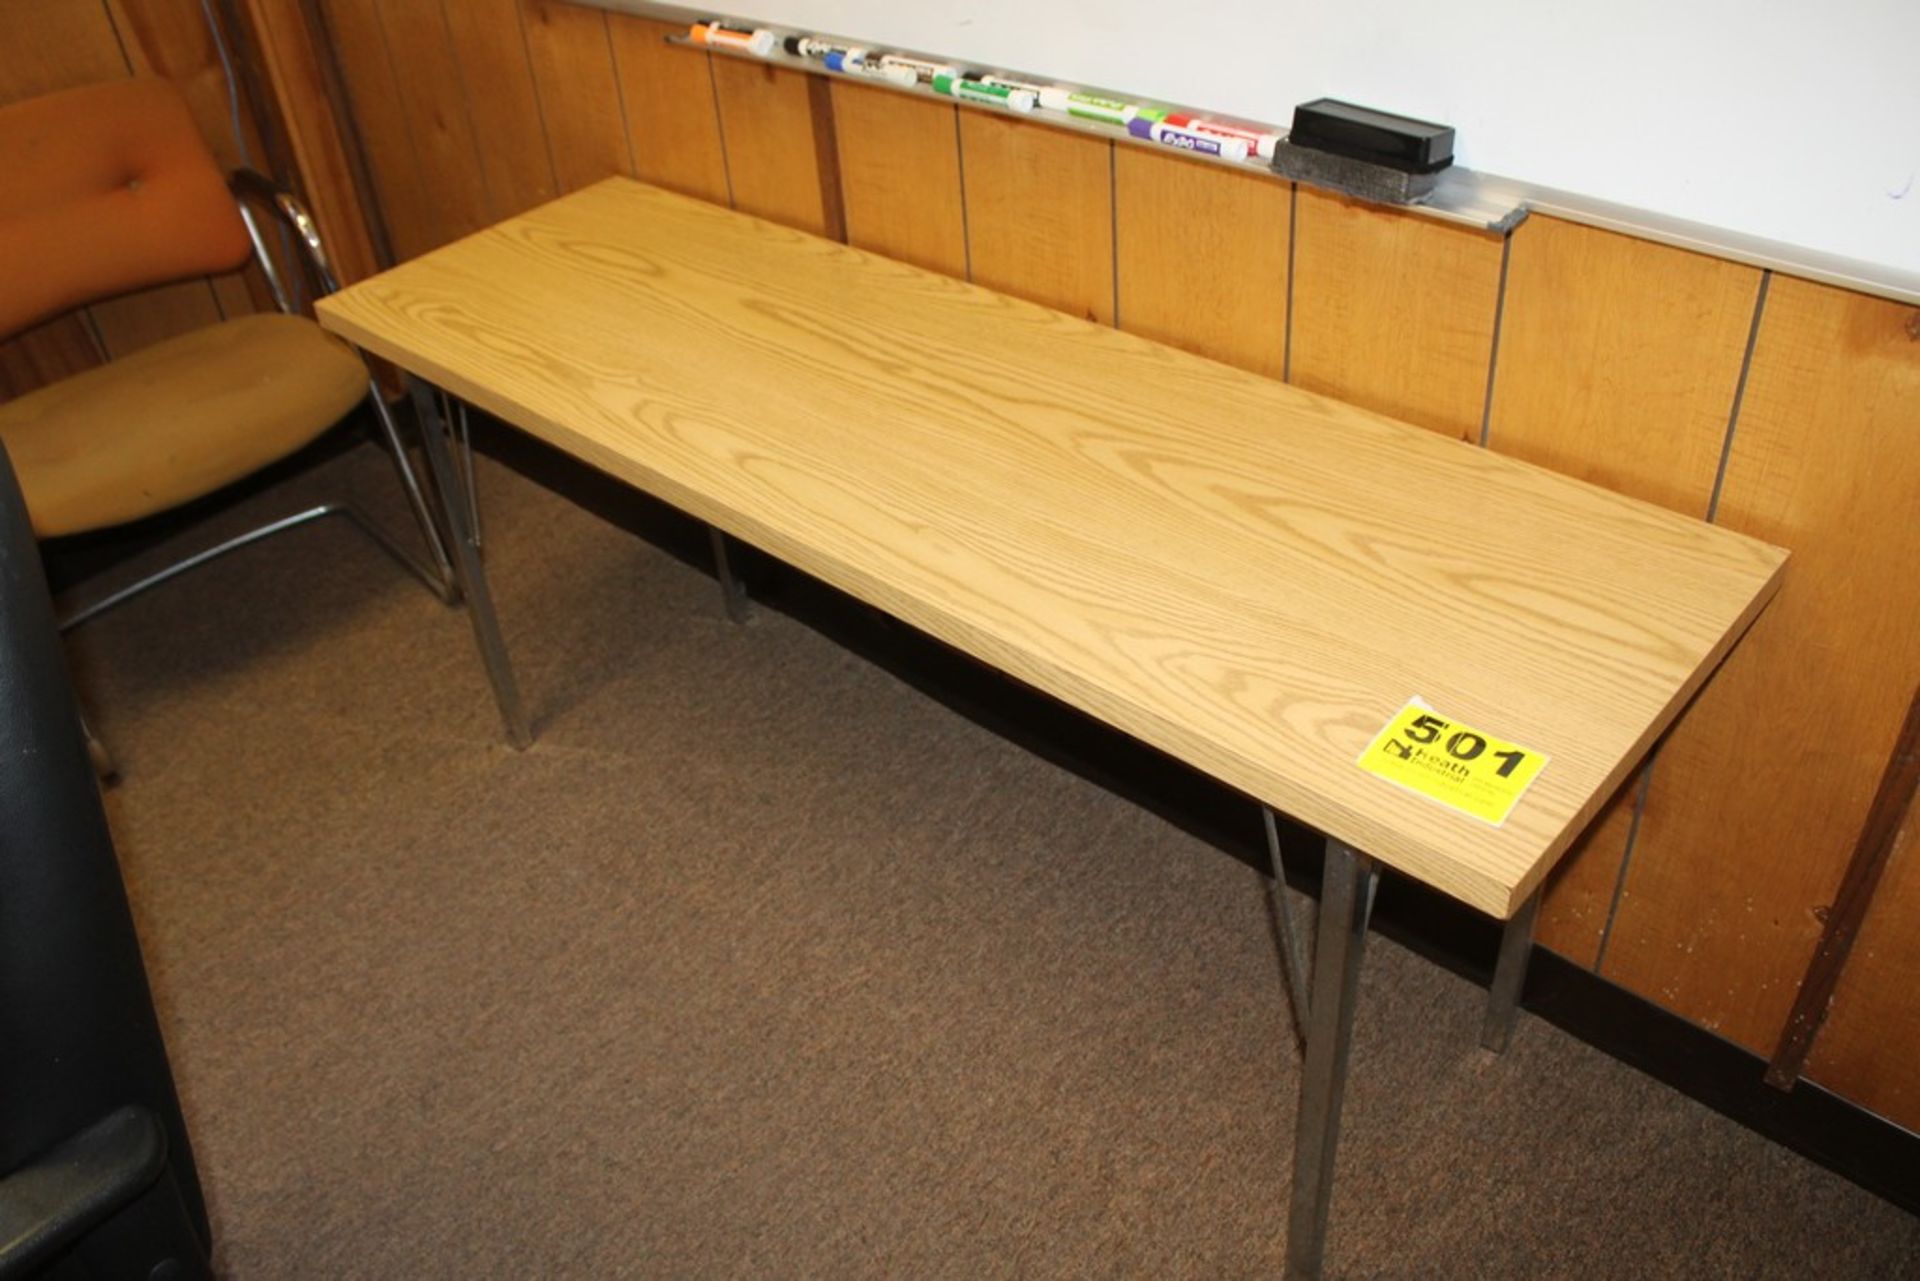 (2) OFFICE TABLES 60" X 18" X 29" & DRY ERASE BOARD - Image 2 of 2